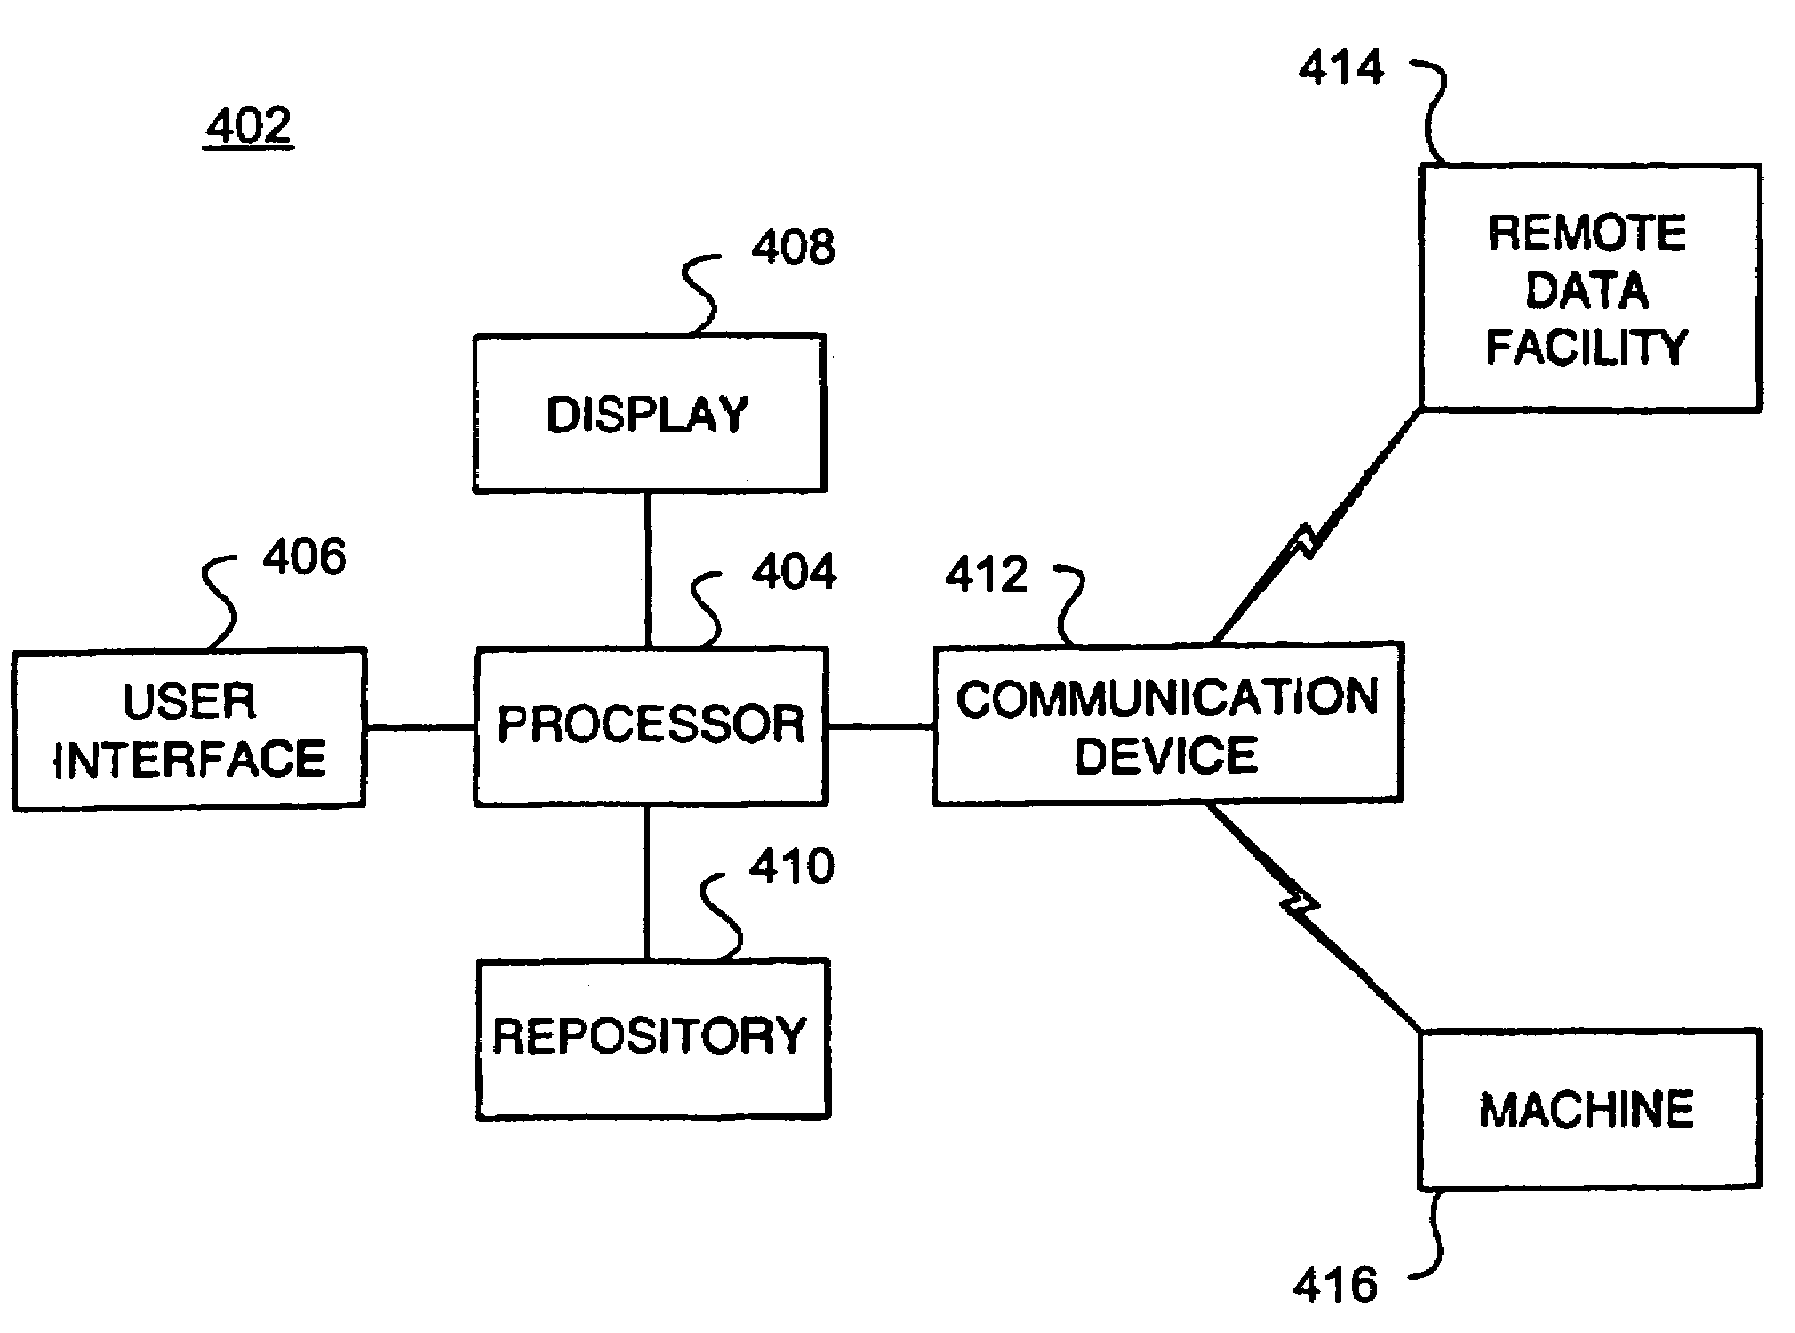 Method and system of forecasting compaction performance